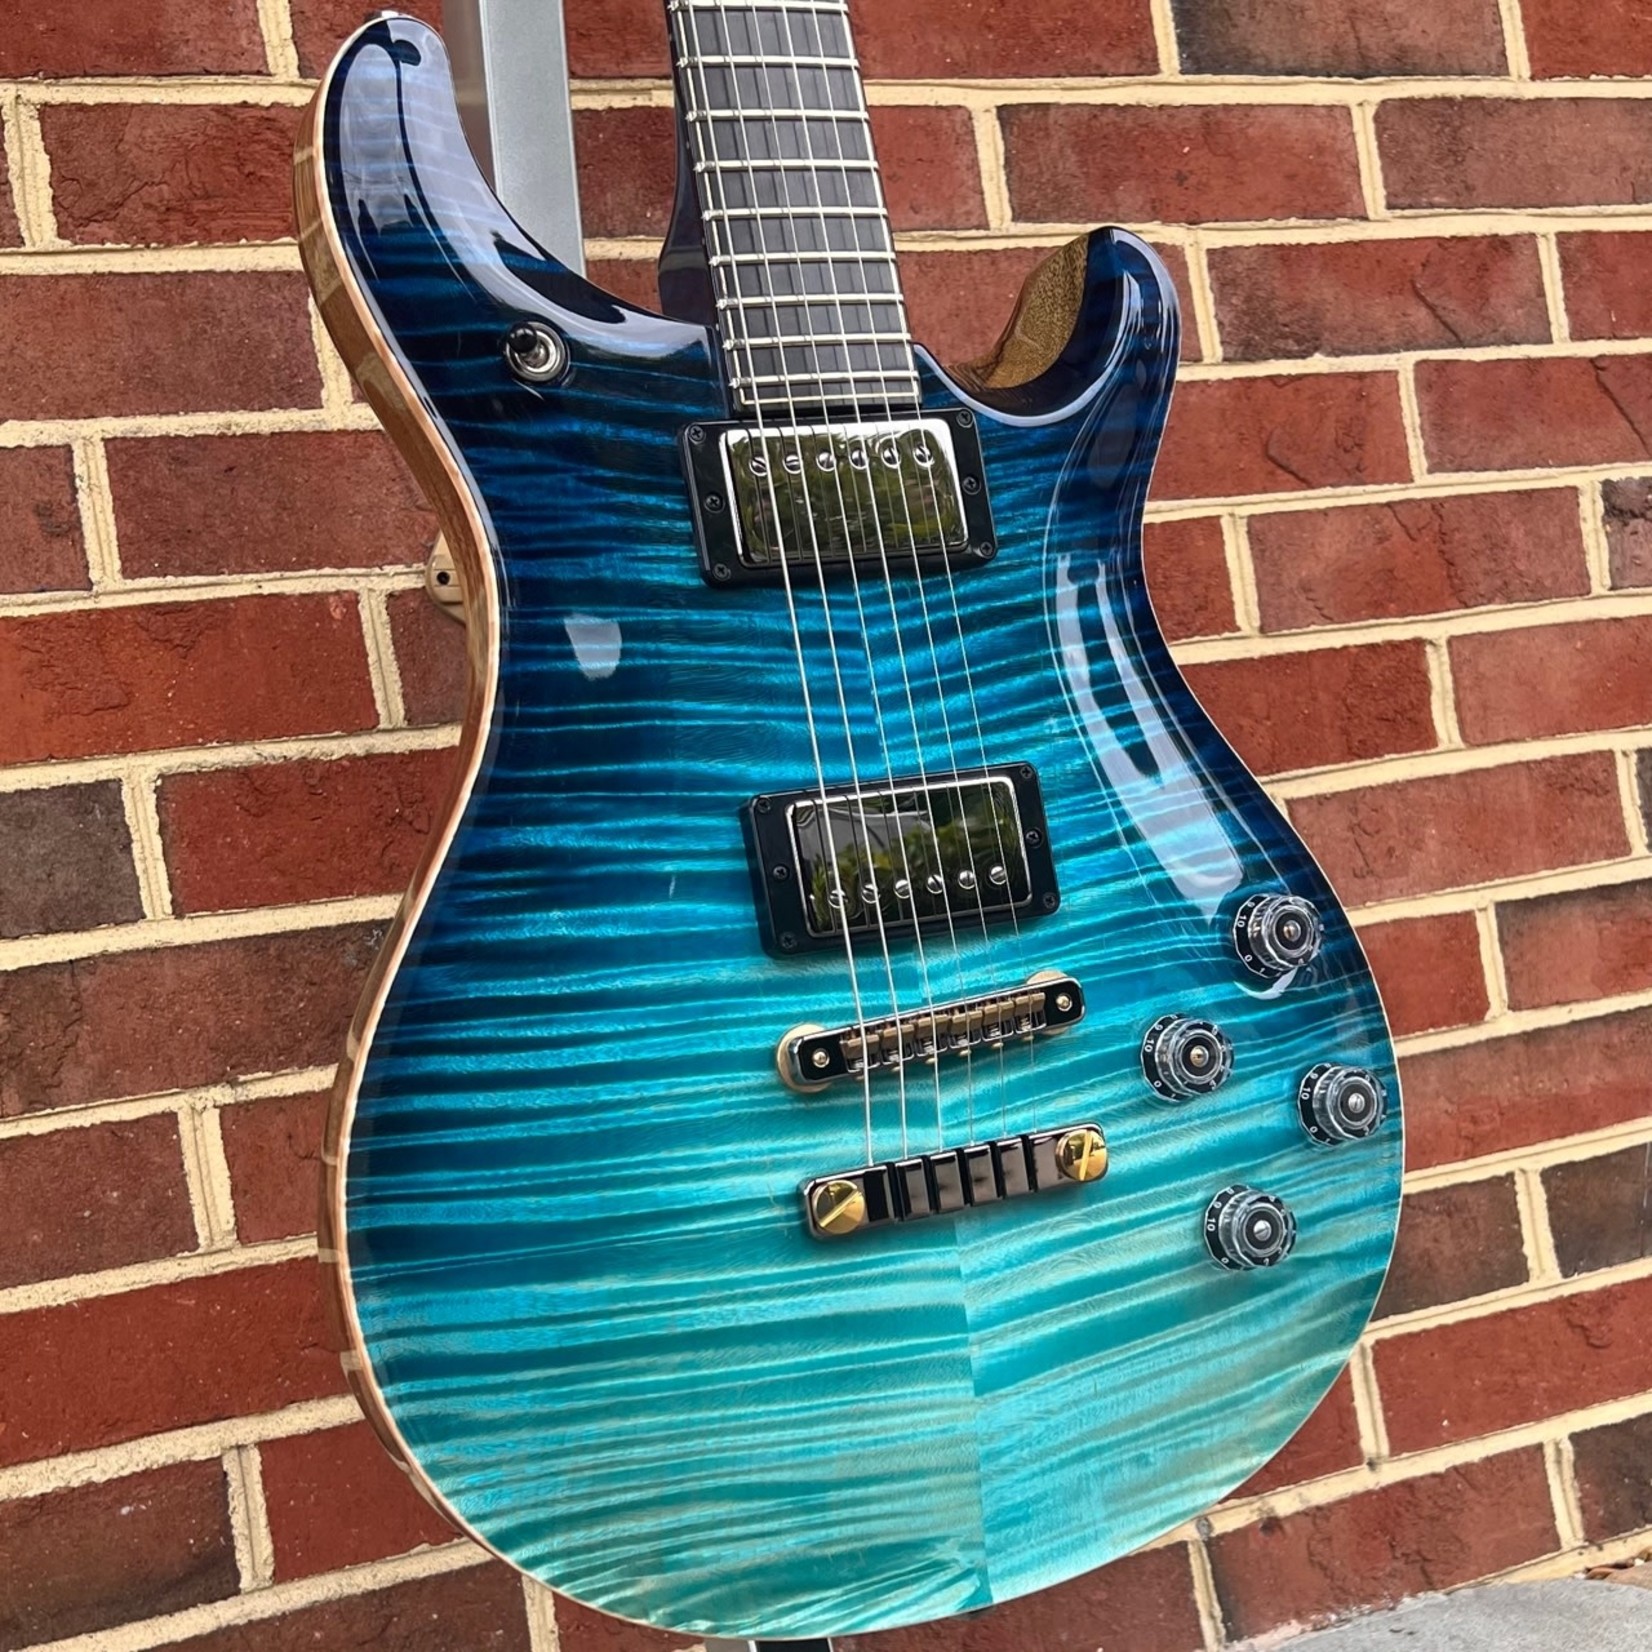 Paul Reed Smith Paul Reed Smith Private Stock McCarty 594, PS# 9741, Sub Zero Dragon's Breath, East Coast Flamed Maple Top, Black Limba Body, Curly Maple Neck, Birds of a Feather Inlay (ebony/maple), Matching Back Plates, Smoked Black Hardware, Hardshell Case